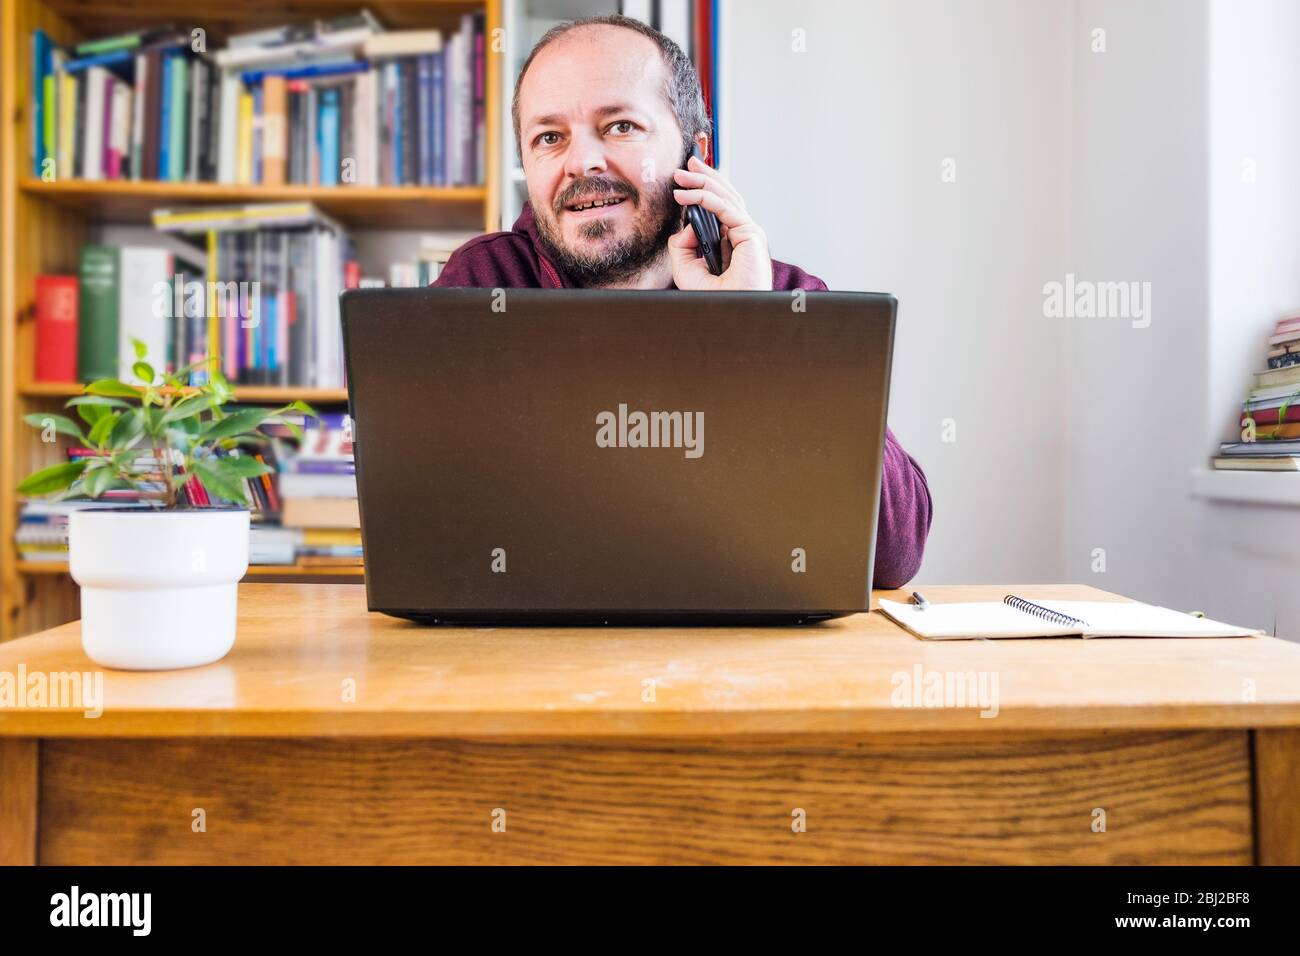 Man working from home office. Adult bearded man concentrated, working online from home on computer laptop behind vintage desk Stock Photo